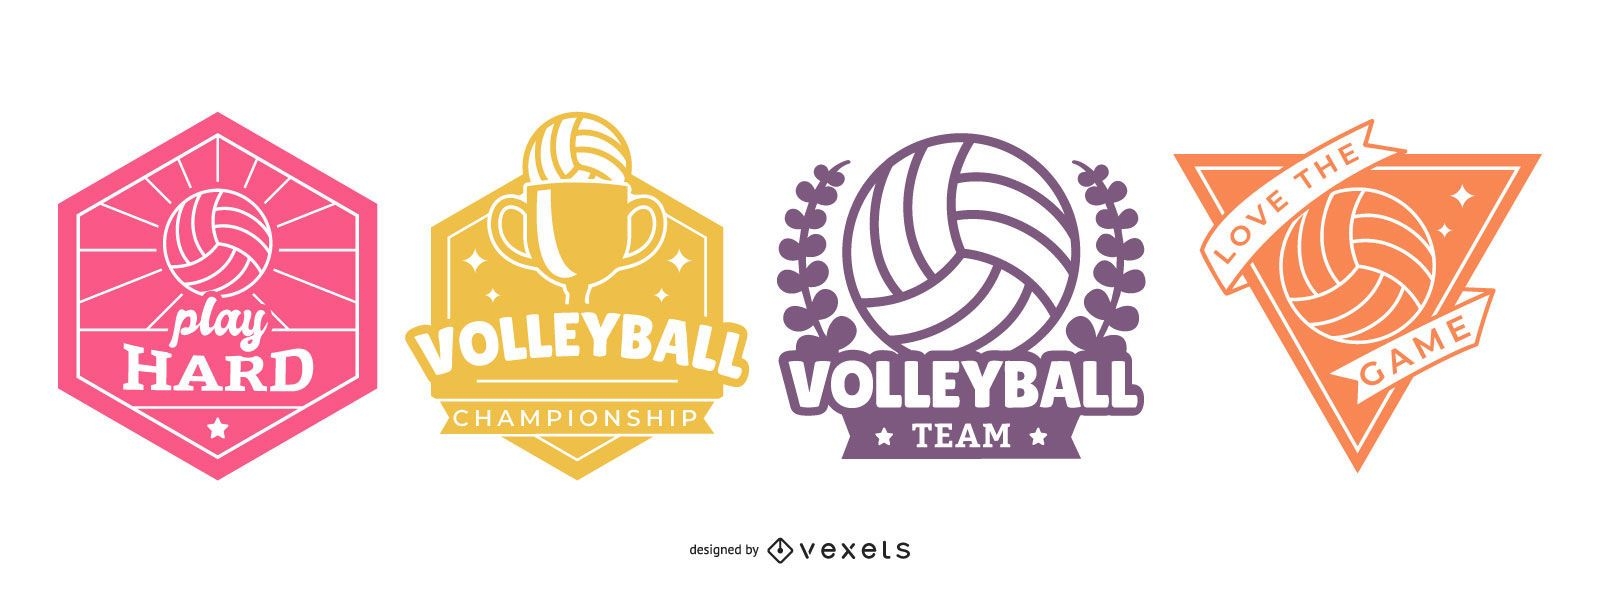 Volleyball Badges Set